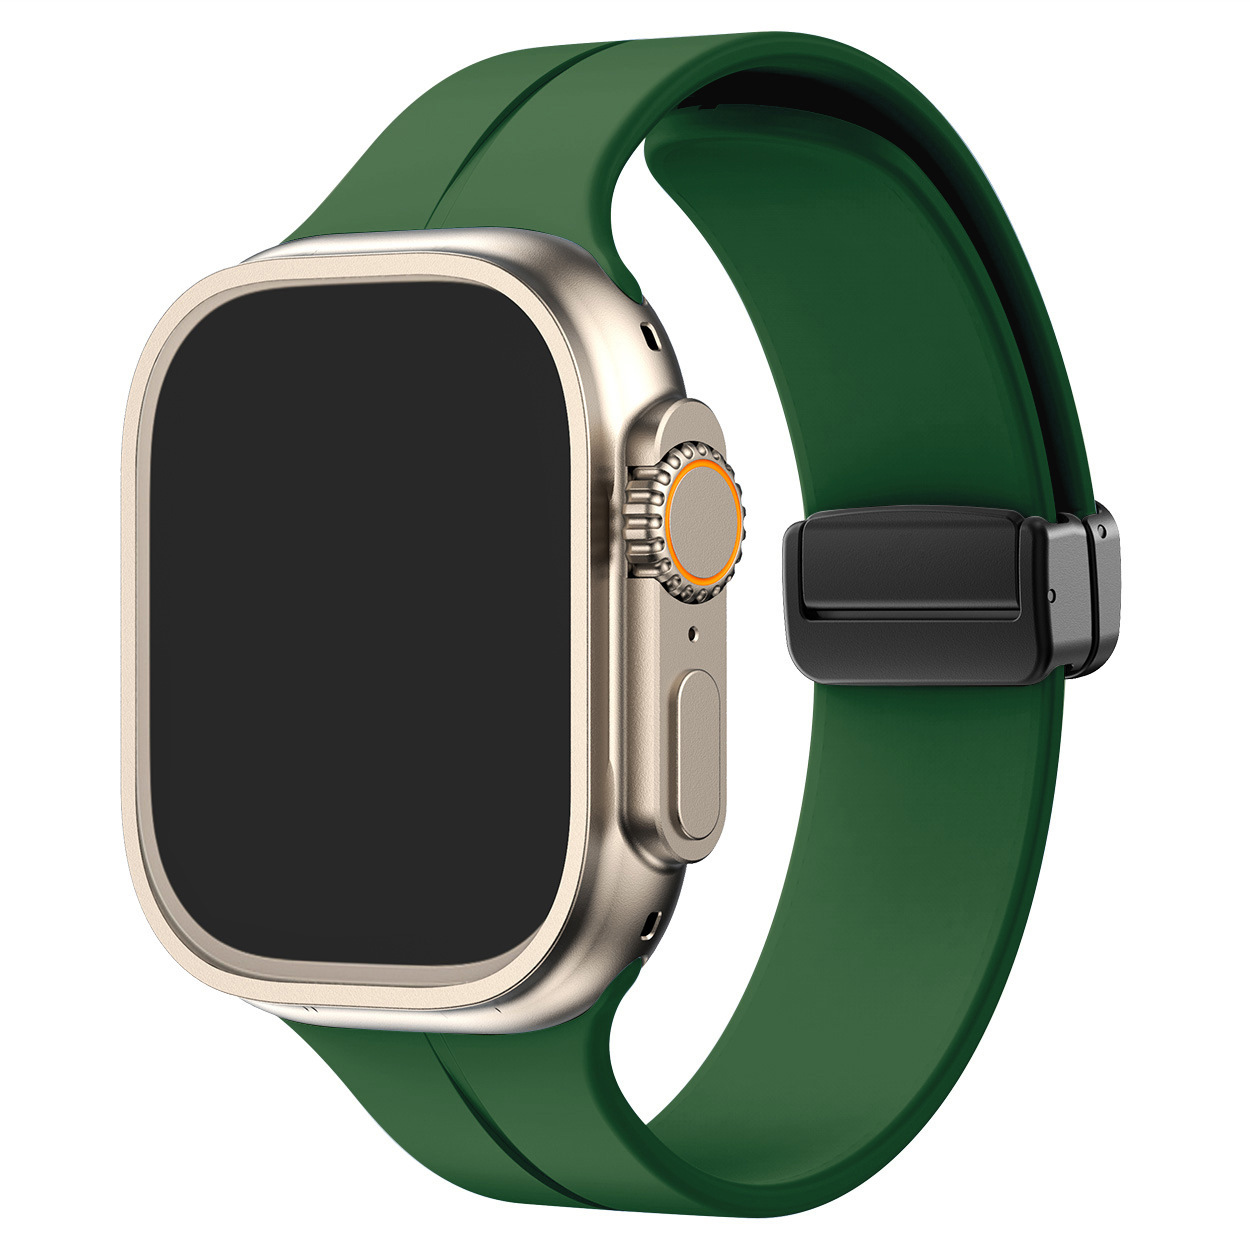 FlexiFit Magnetic Band for Apple Watch